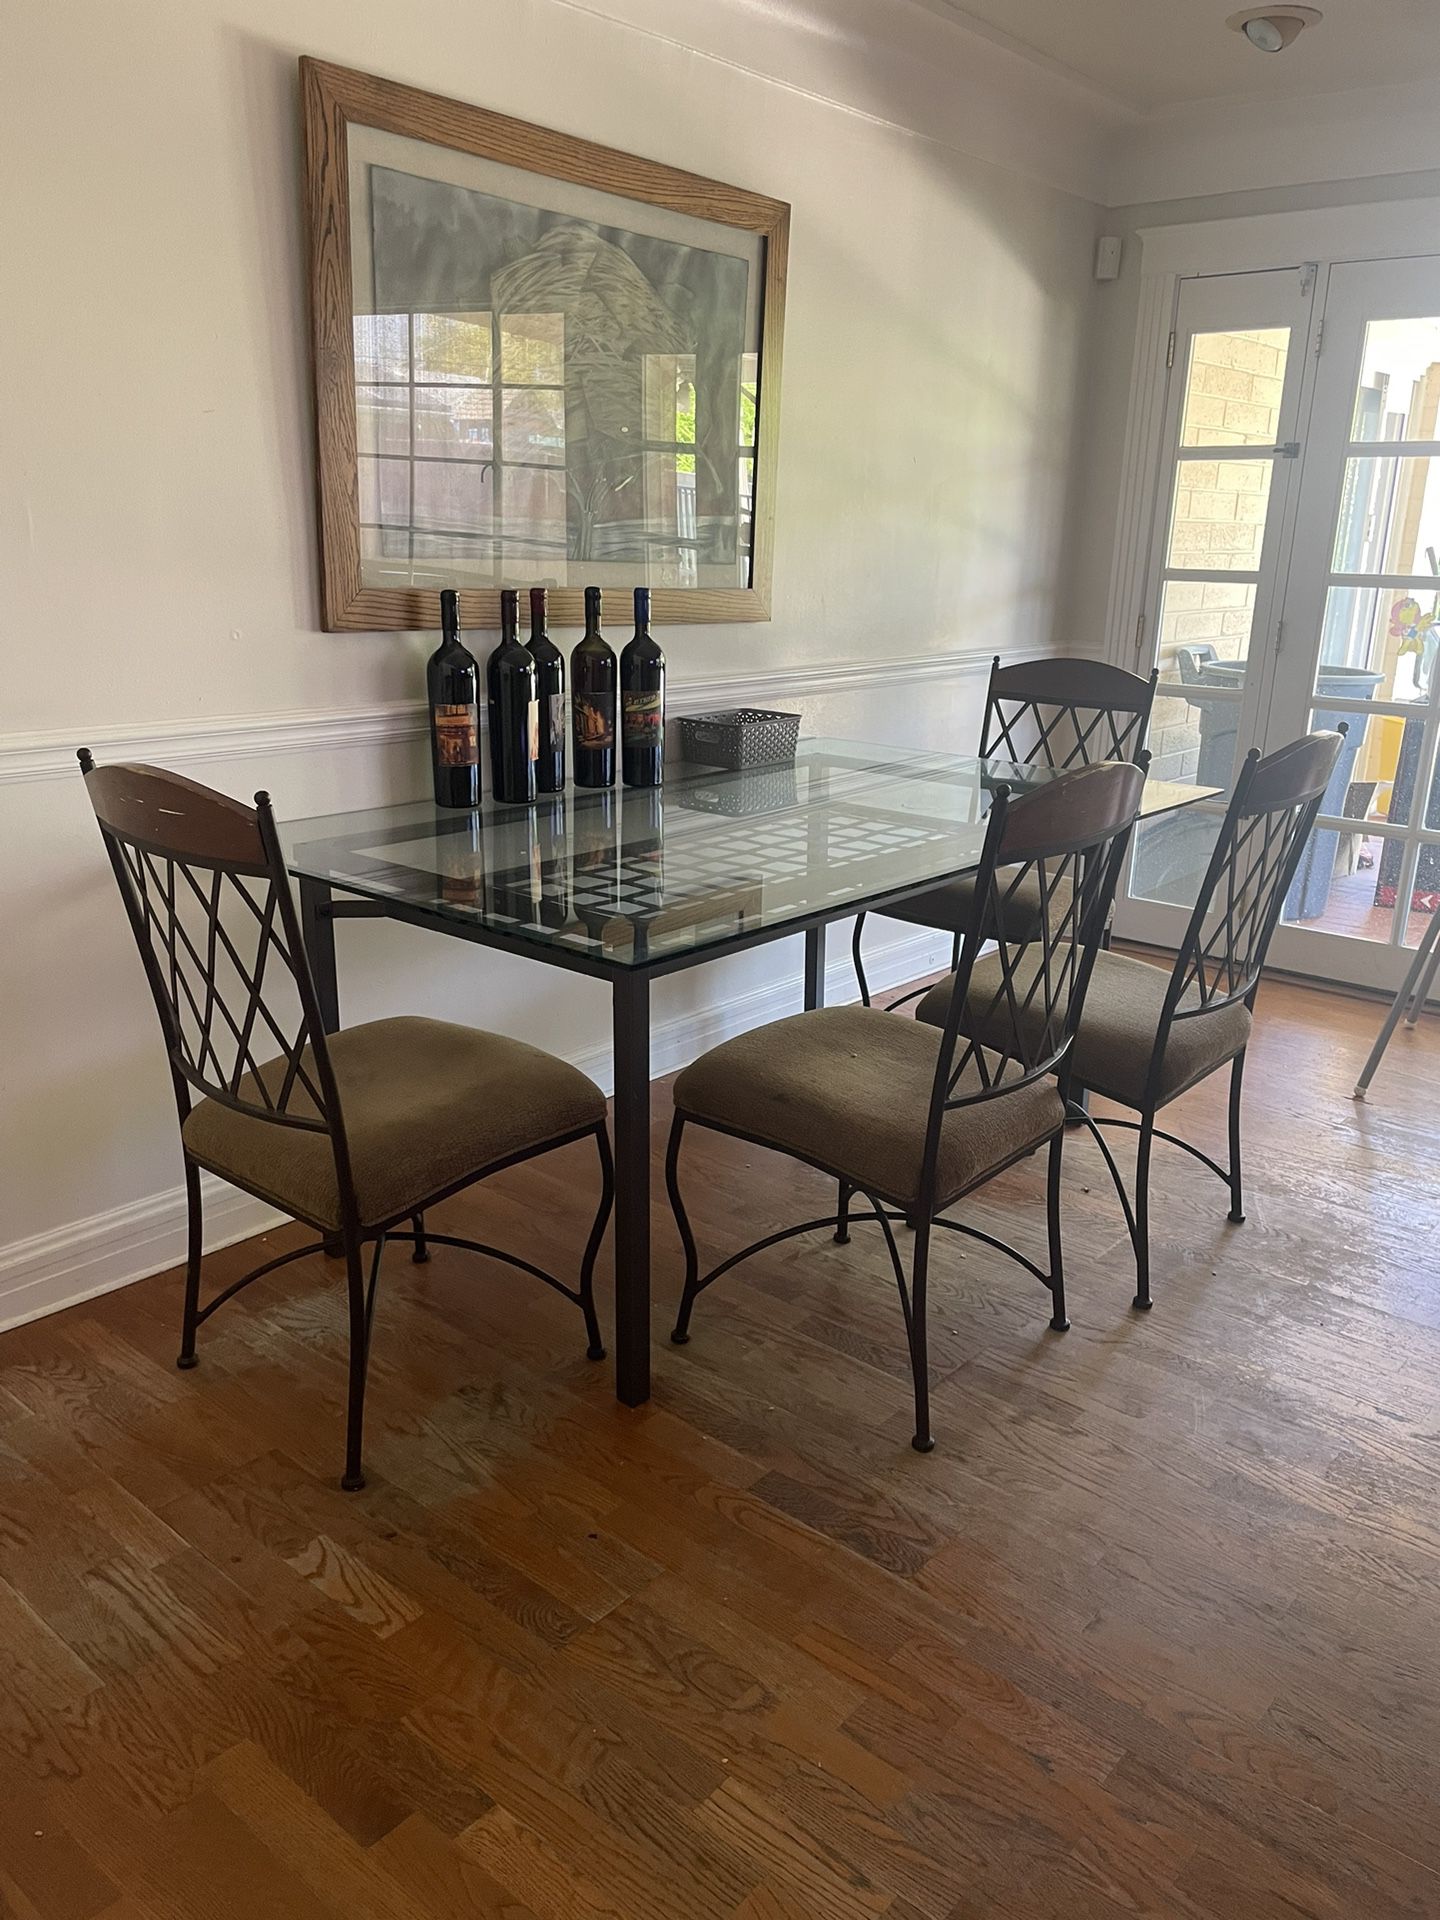 Glass Top Kitchen Table 